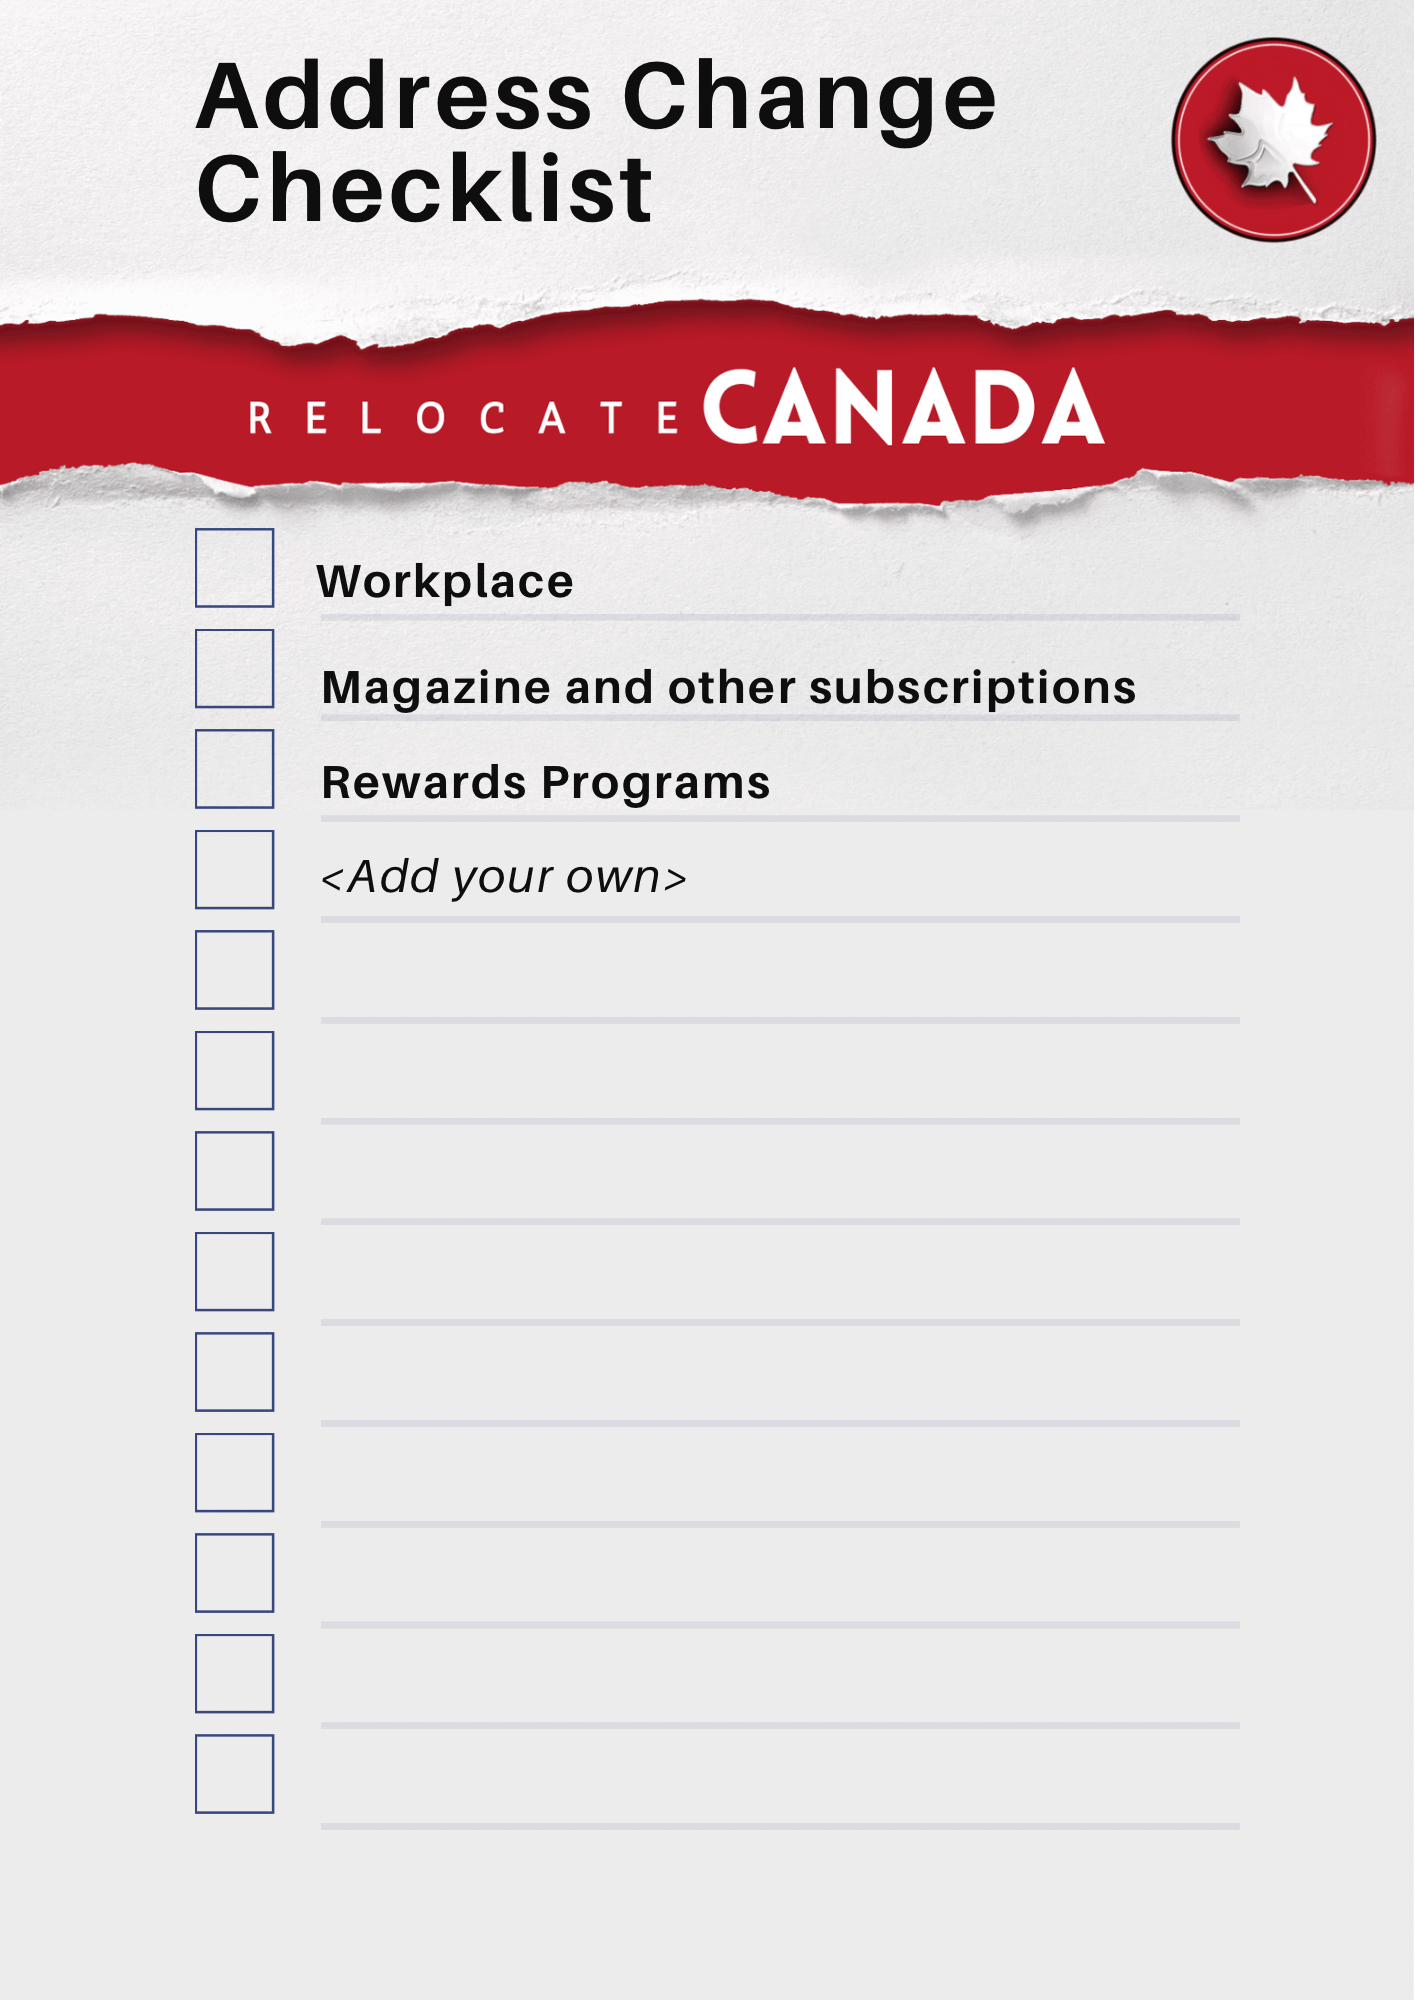 Address Change Checklist for Canada that can be customized and personalised